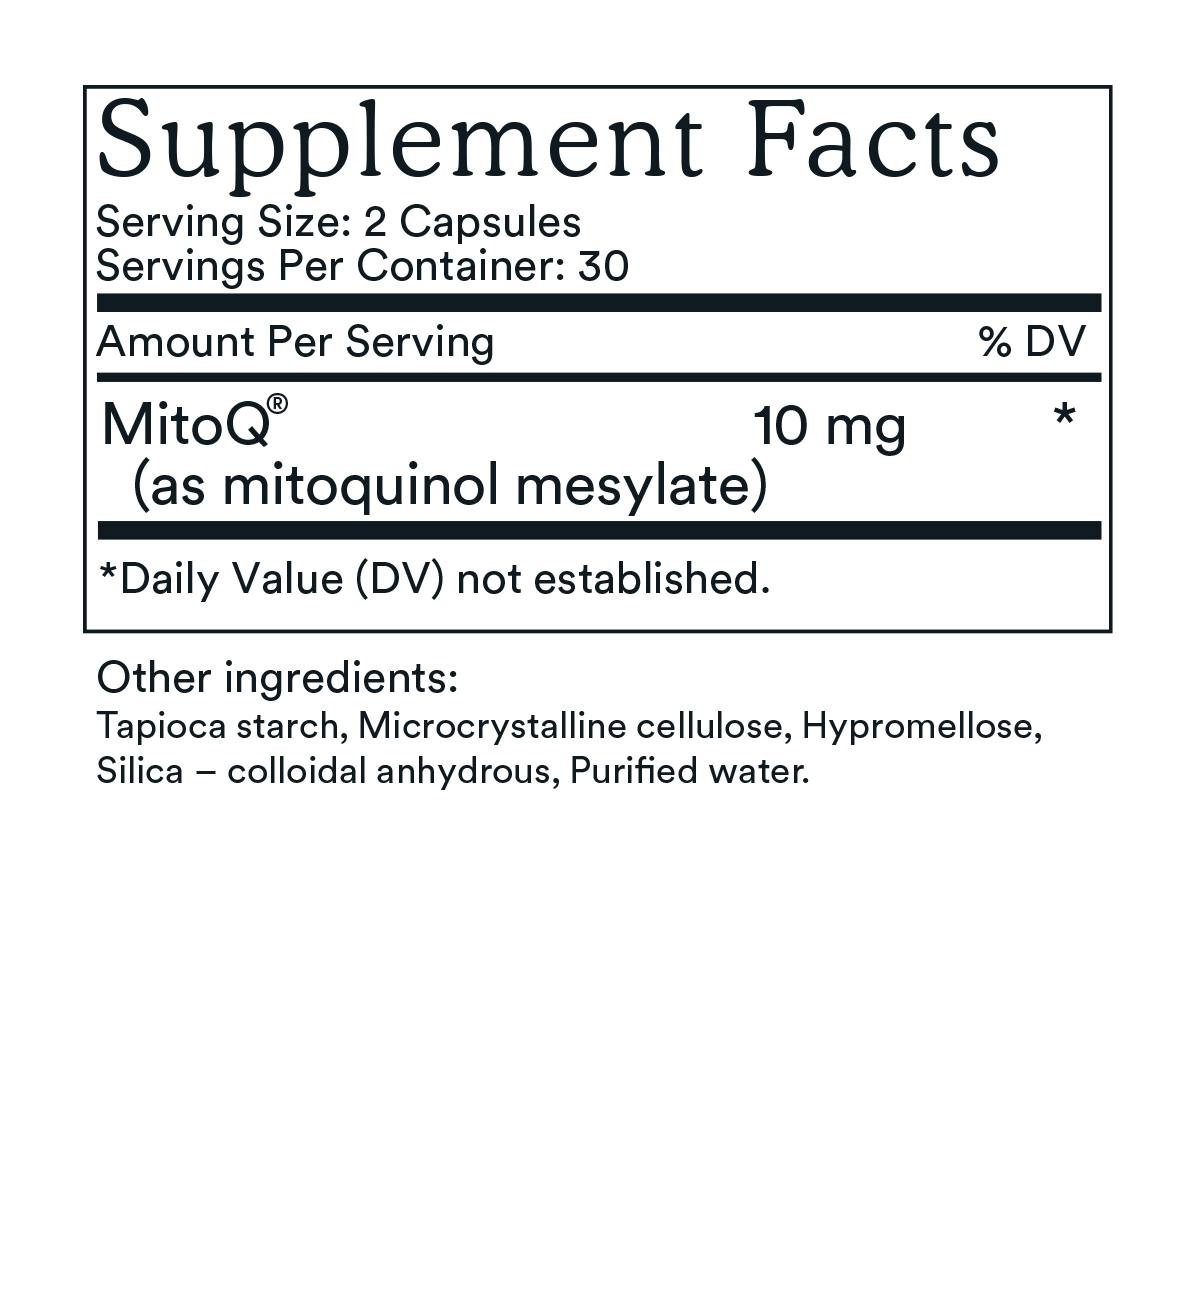 Supplement Facts label for MitoQ pure